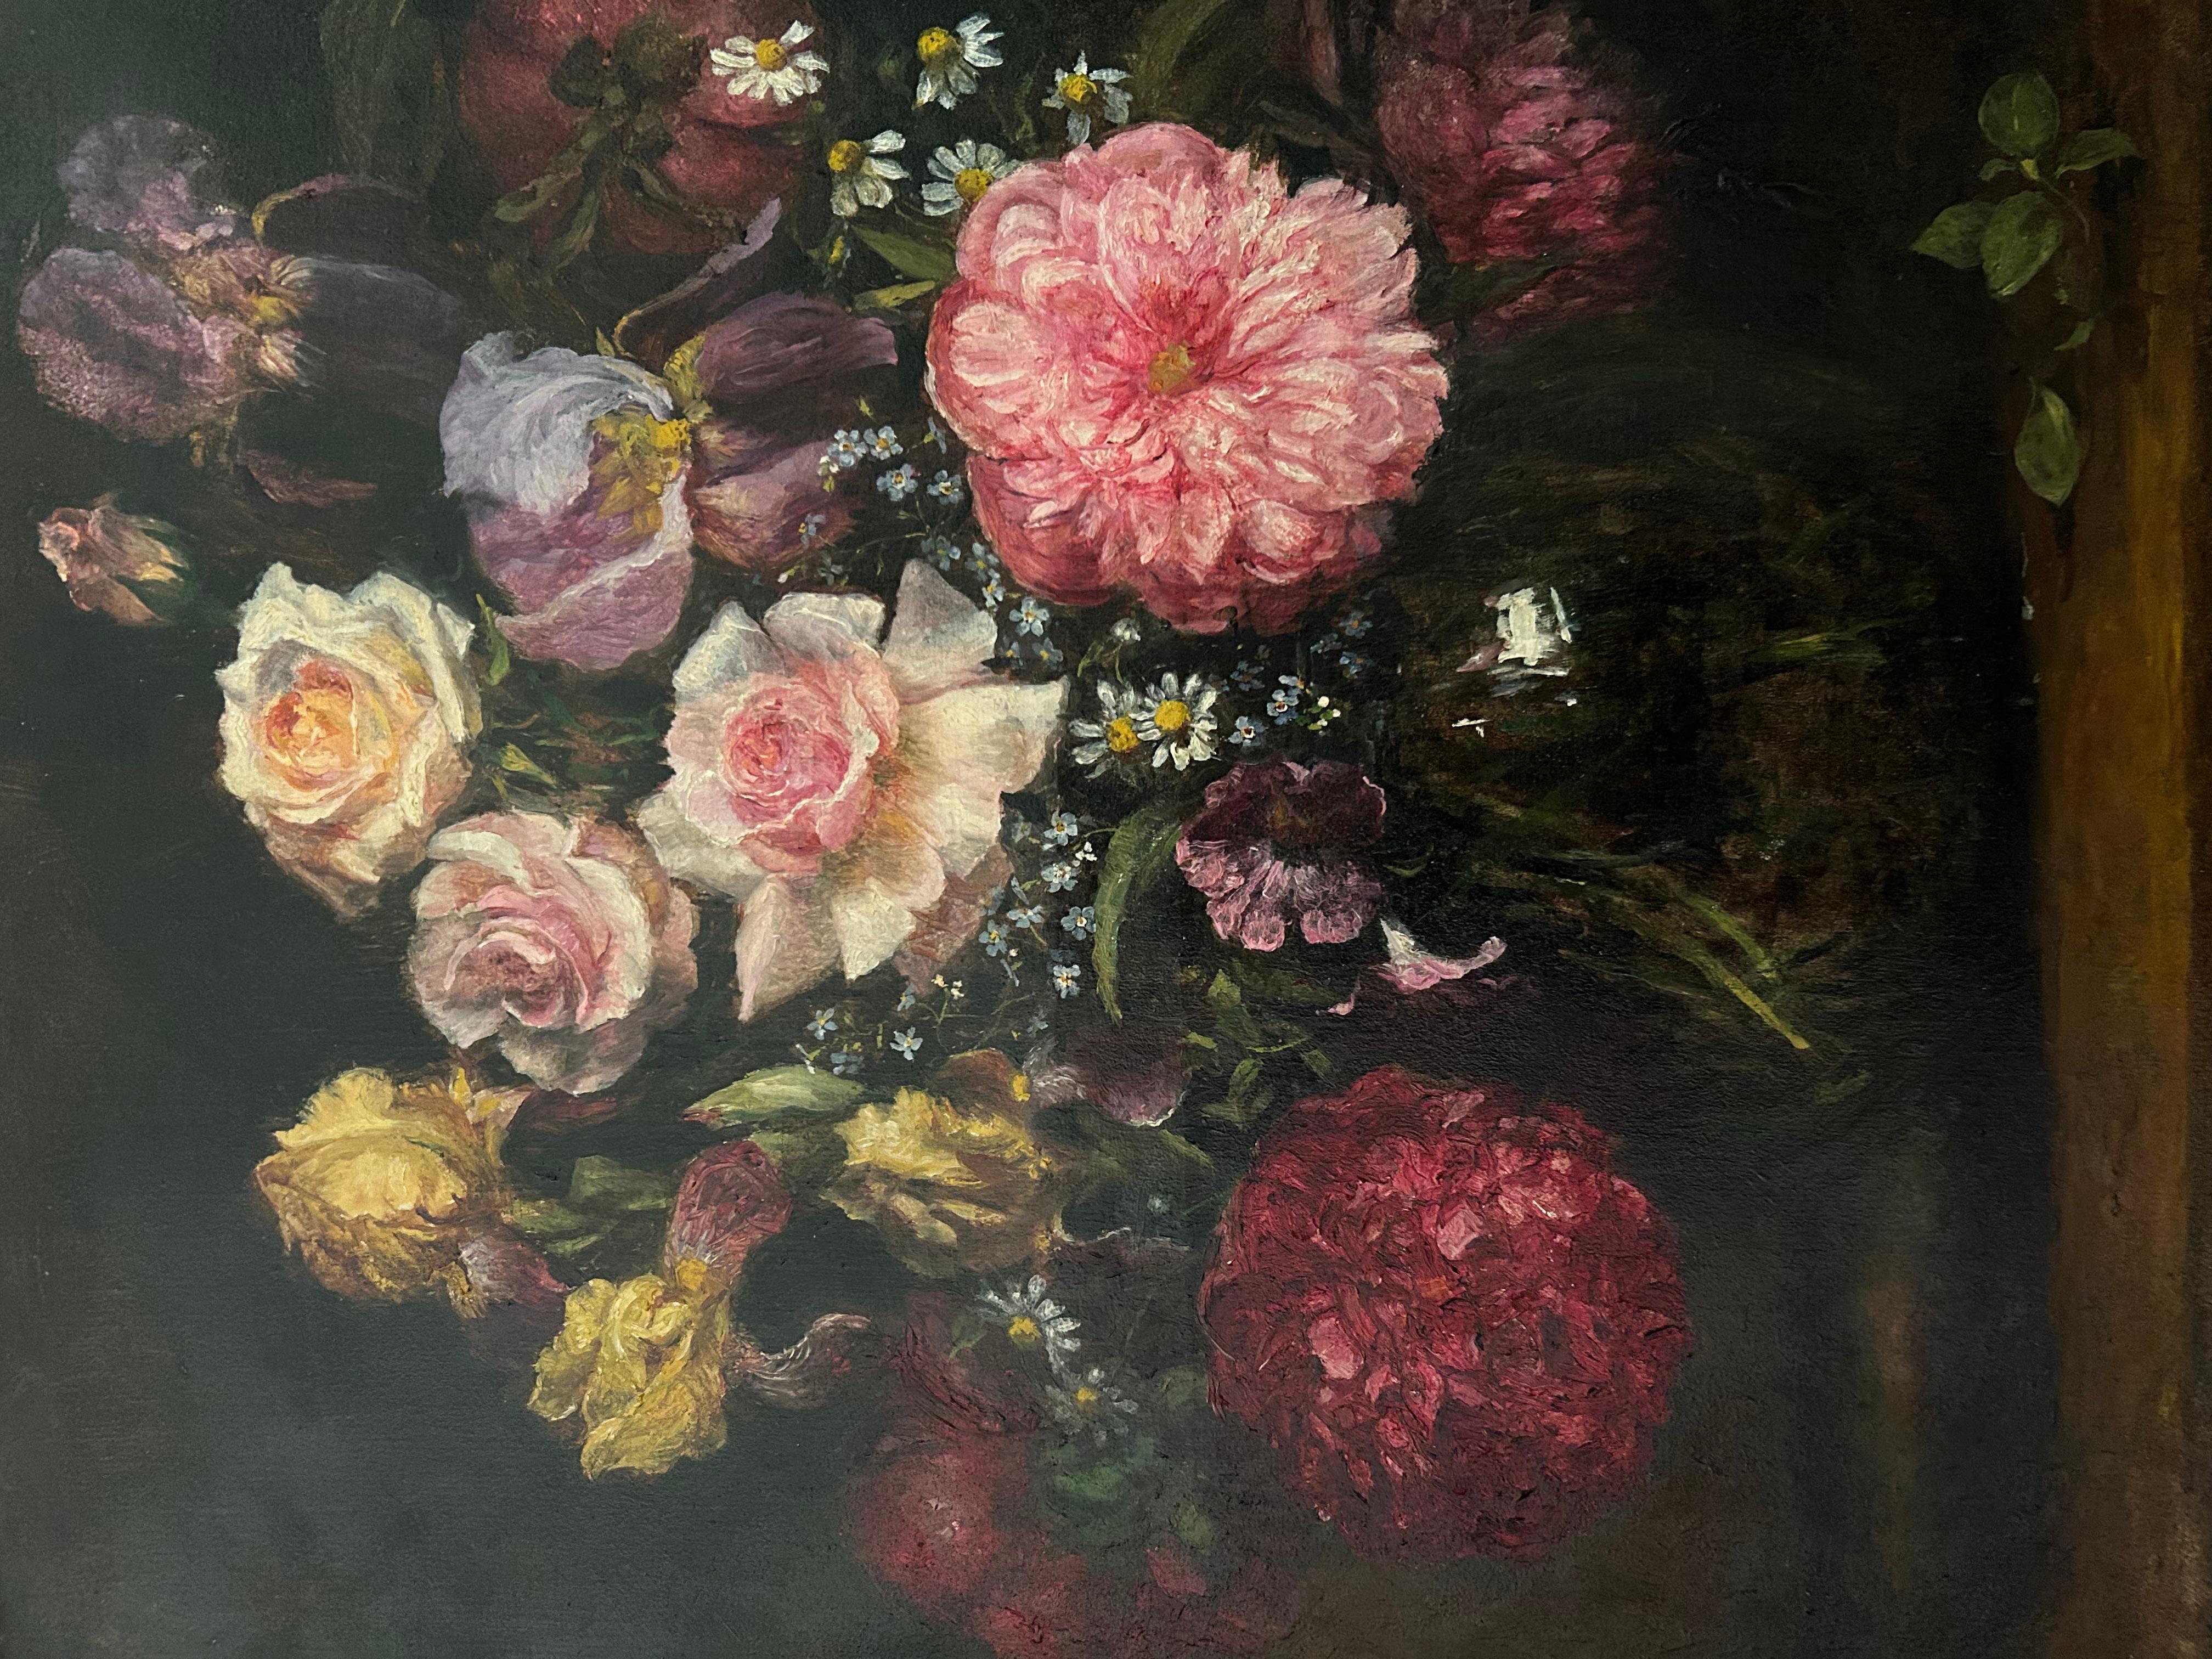 This gorgeous painting, Still Life of Flowers, is by Belgian painter Karel Martin Claessens. A riot of pink, red and yellow blooms cascade over the edge of a glass vase. Photos don't do justice to the tactile beauty in this work, the lovely contrast